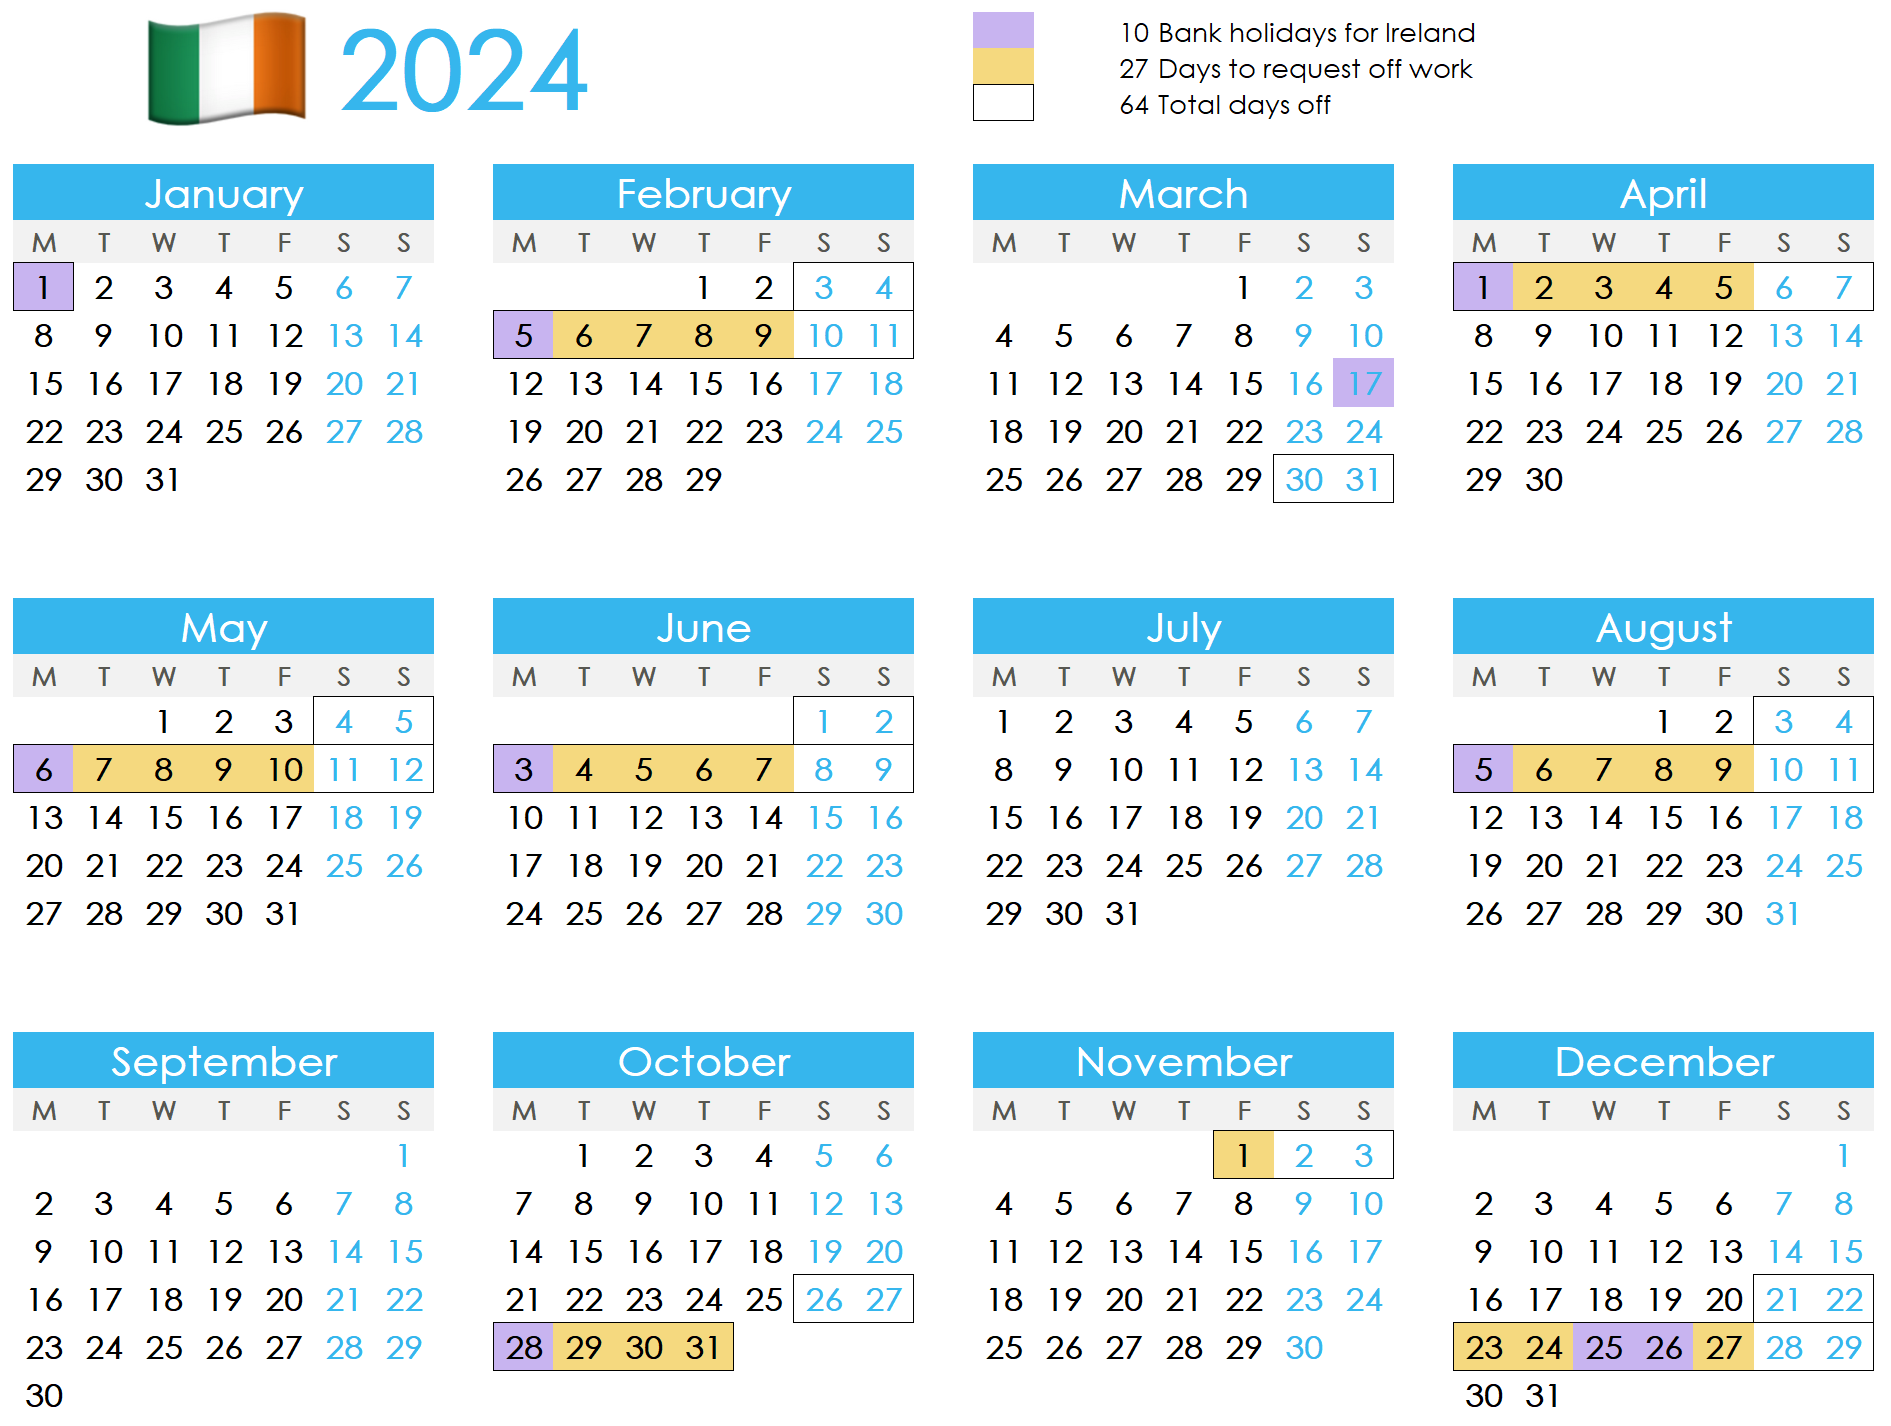 Calendar showing how to maximise annual leave in 2024 for Ireland